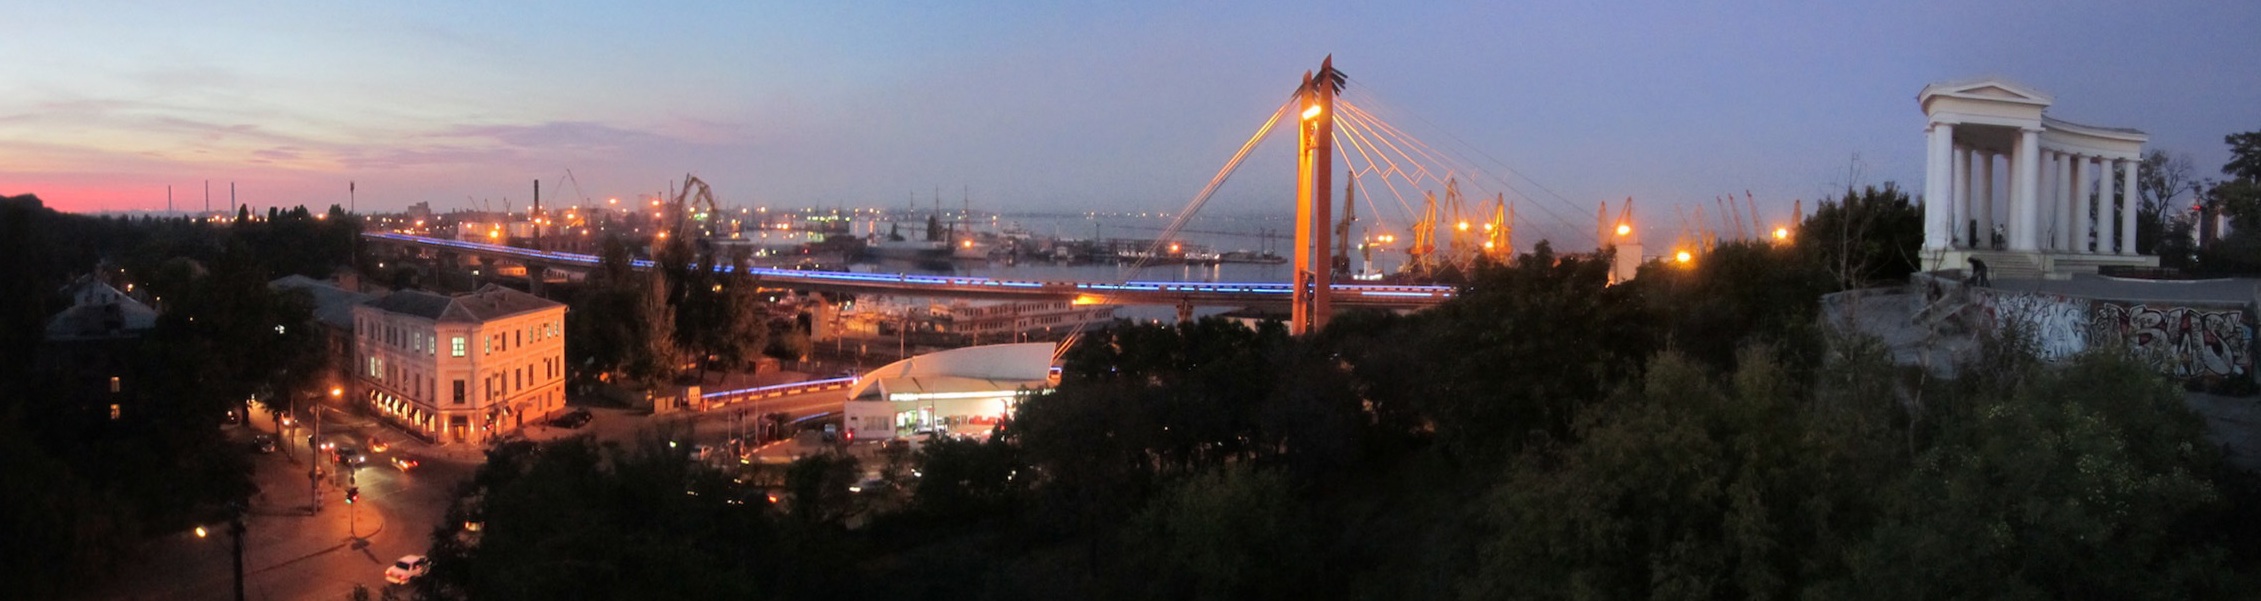 pano: the port of Odessa at night